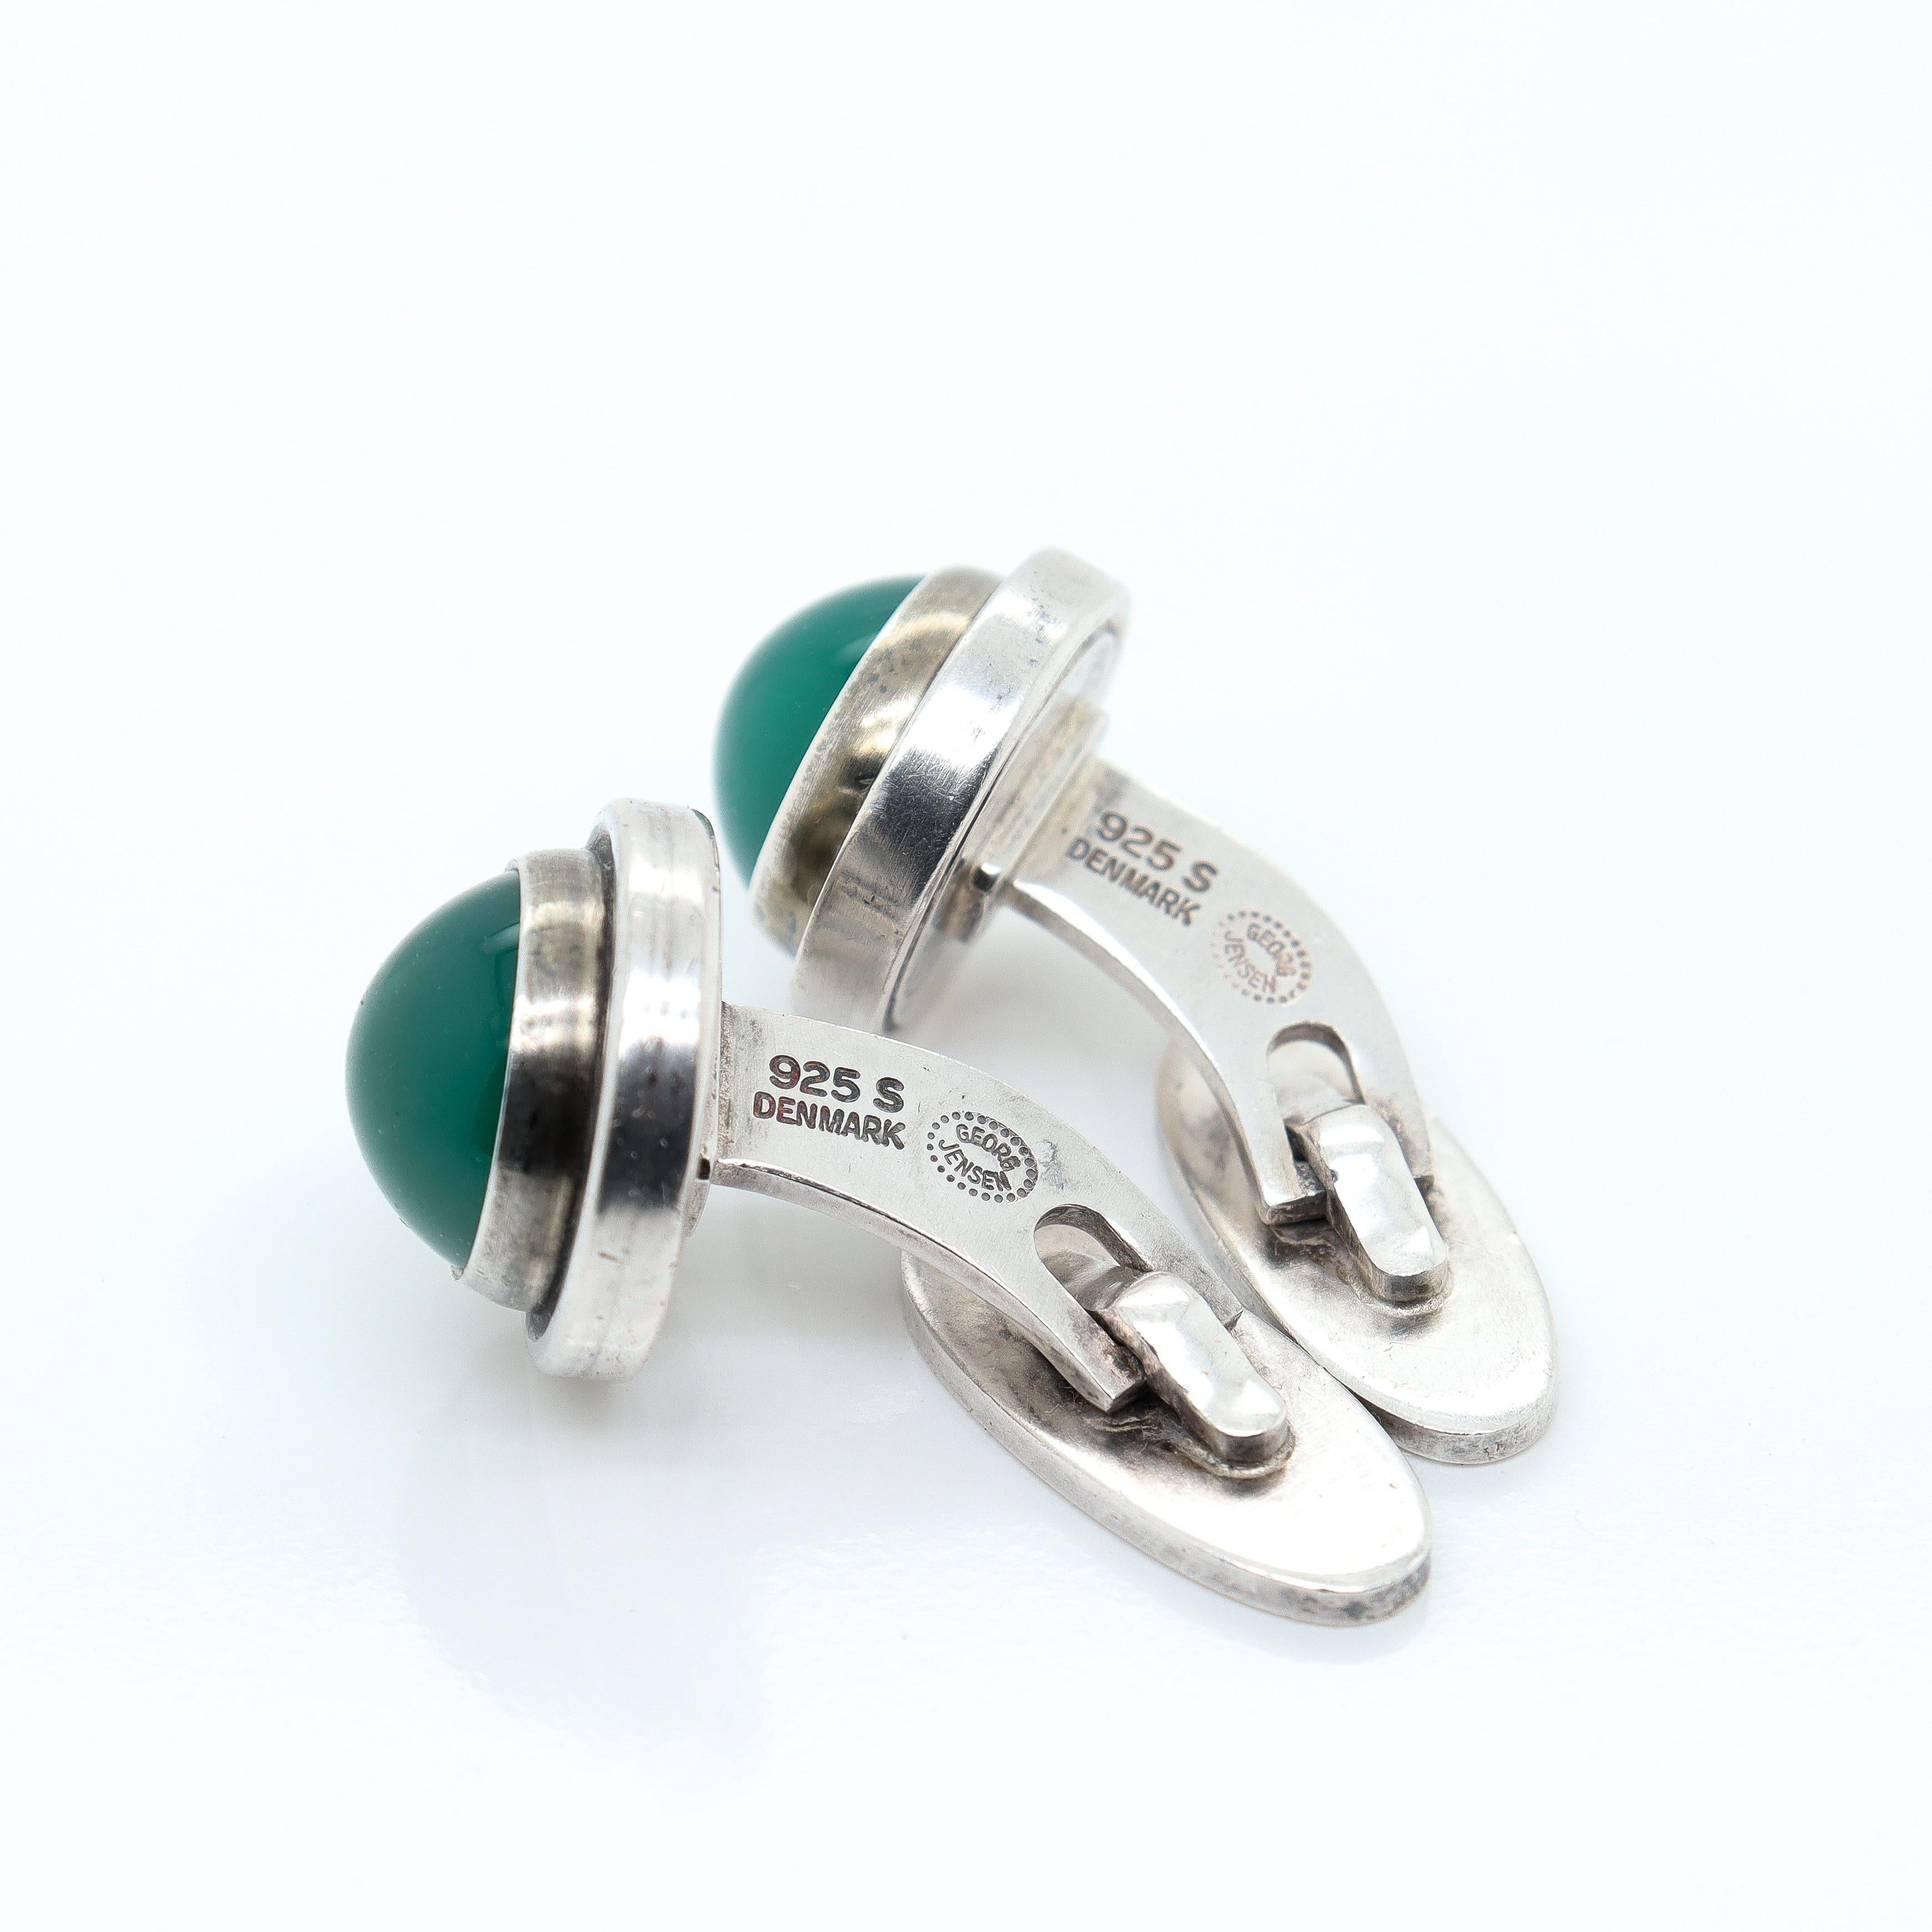 Georg Jensen Sterling Silver Cufflinks Model #44D with Chrysoprase Cabochons In Good Condition For Sale In Philadelphia, PA